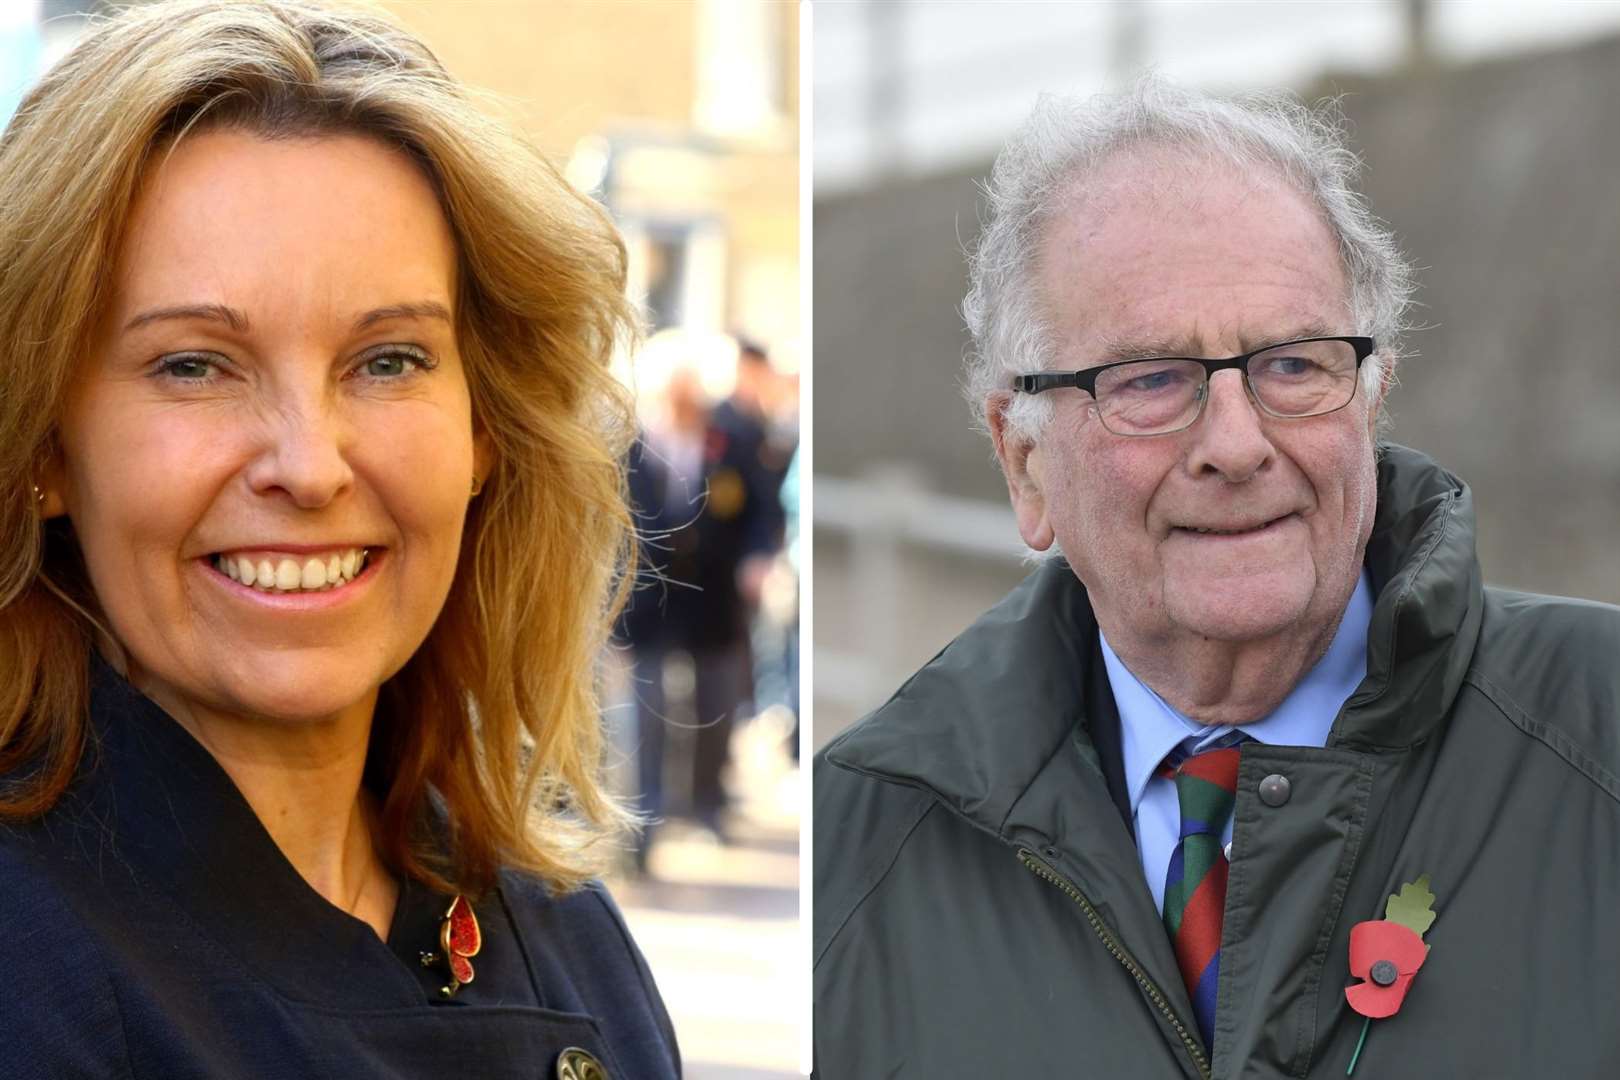 Natalie Elphicke and Sir Roger Gale are facing suspension